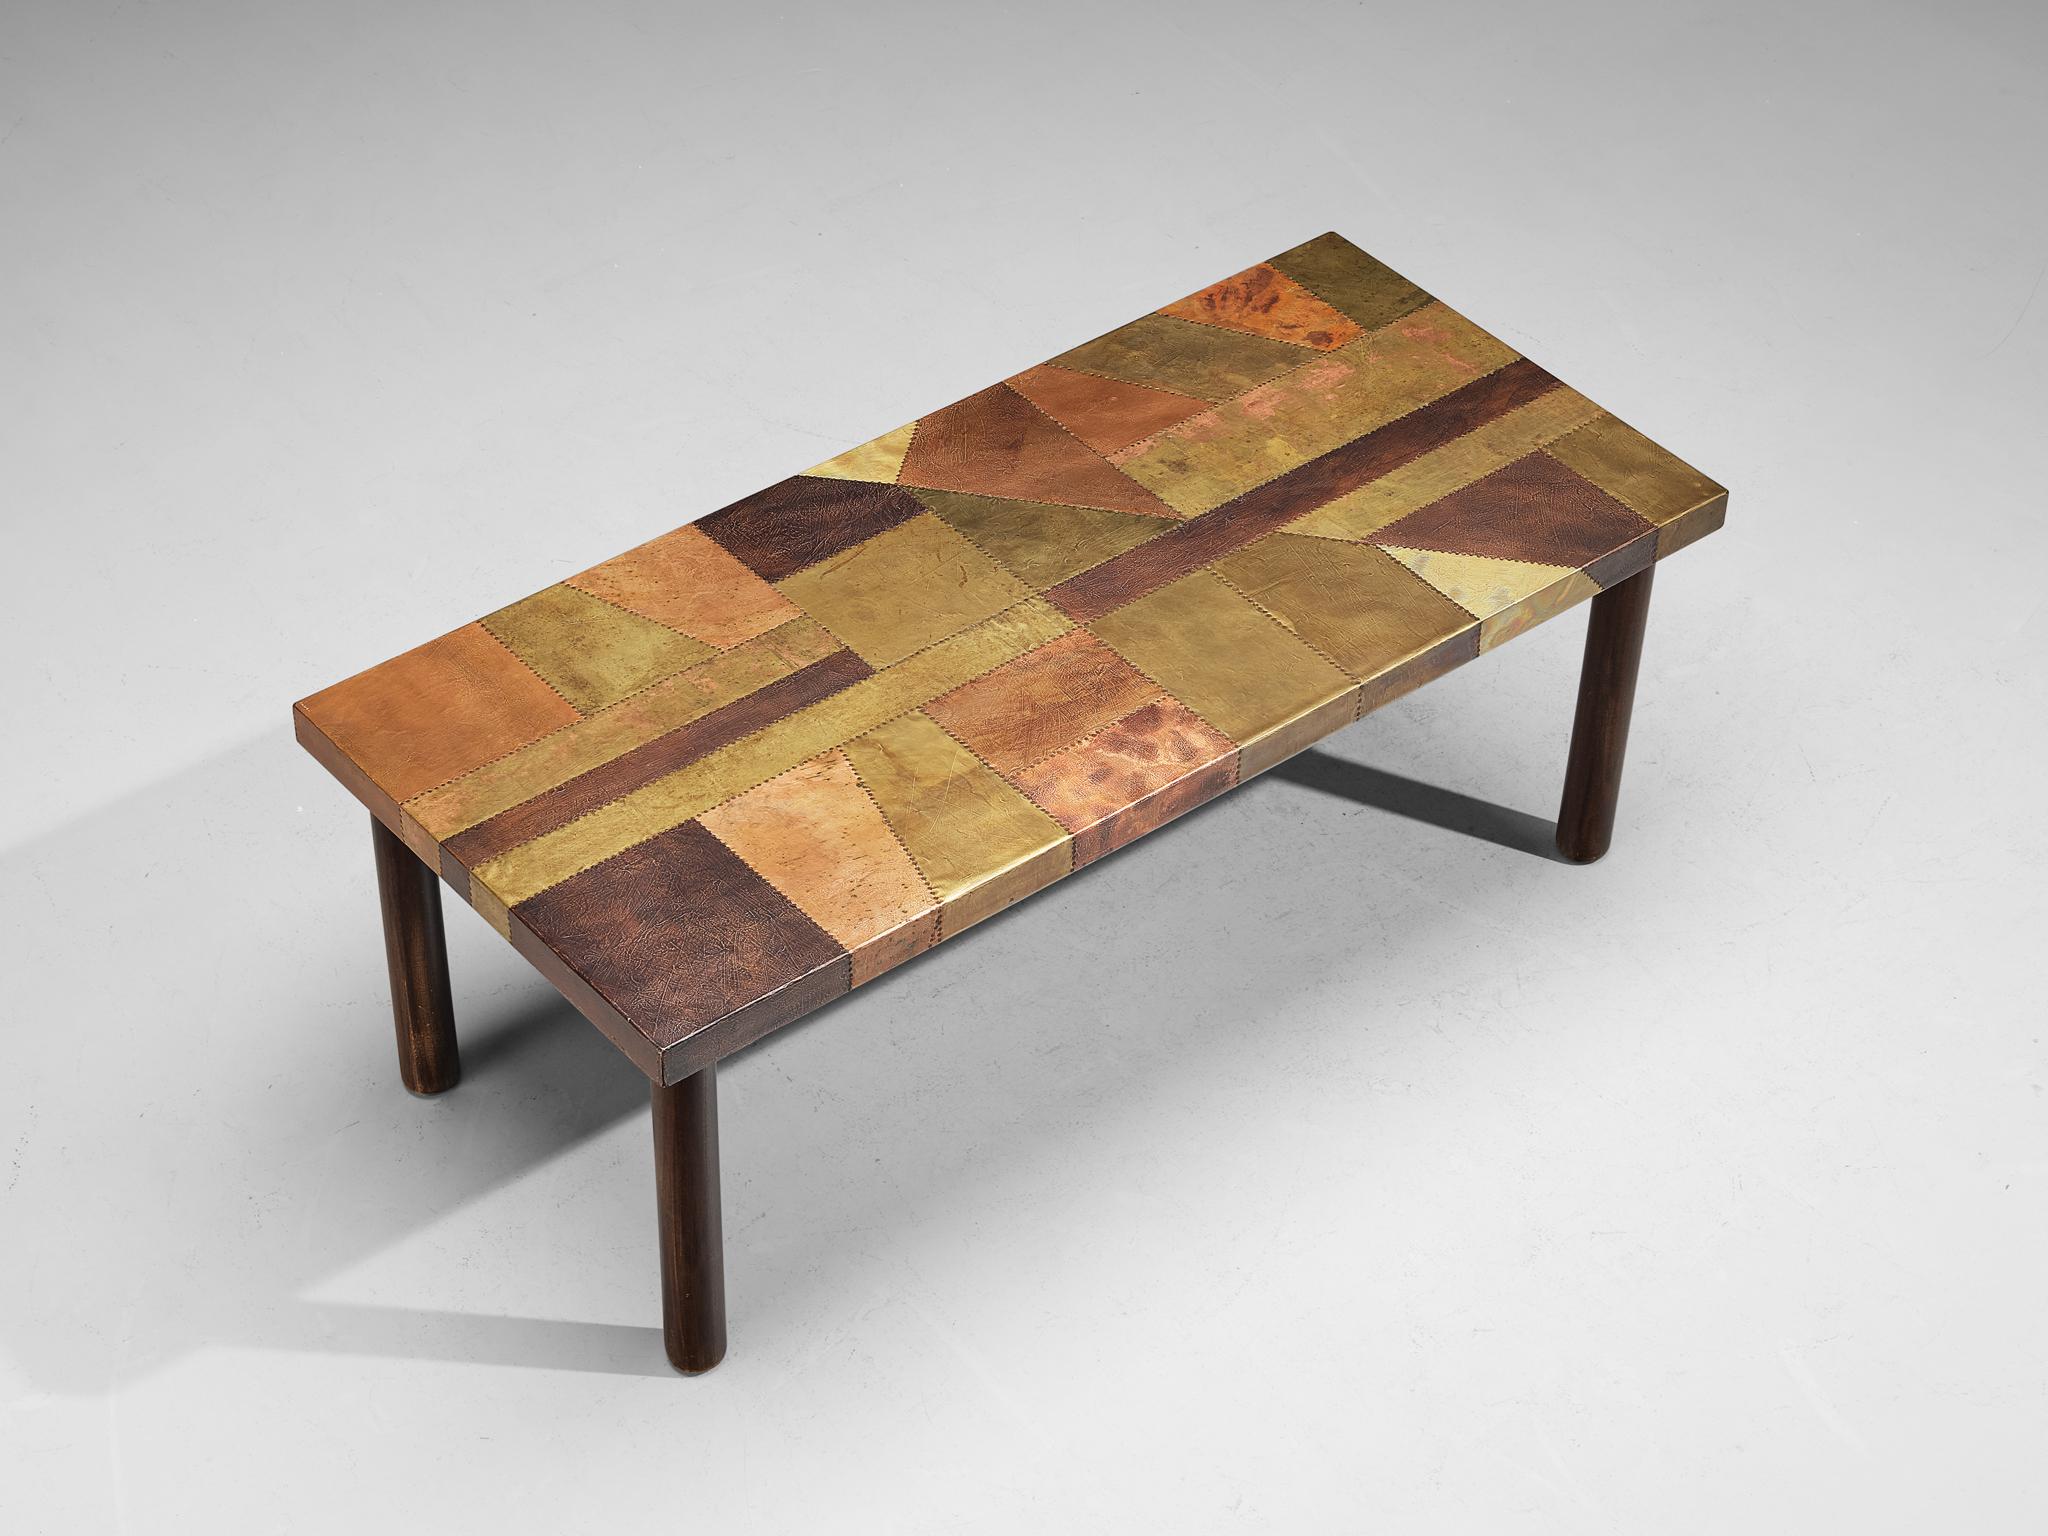 Lorenzo Burchiellaro, dining or center table, copper, stained beech, Italy, 1960s

This magnificent dining table is created by Italian designer and sculptor Lorenzo Burchiellaro (1933-2017) in the 1960s. The copper is in beautiful, patinated